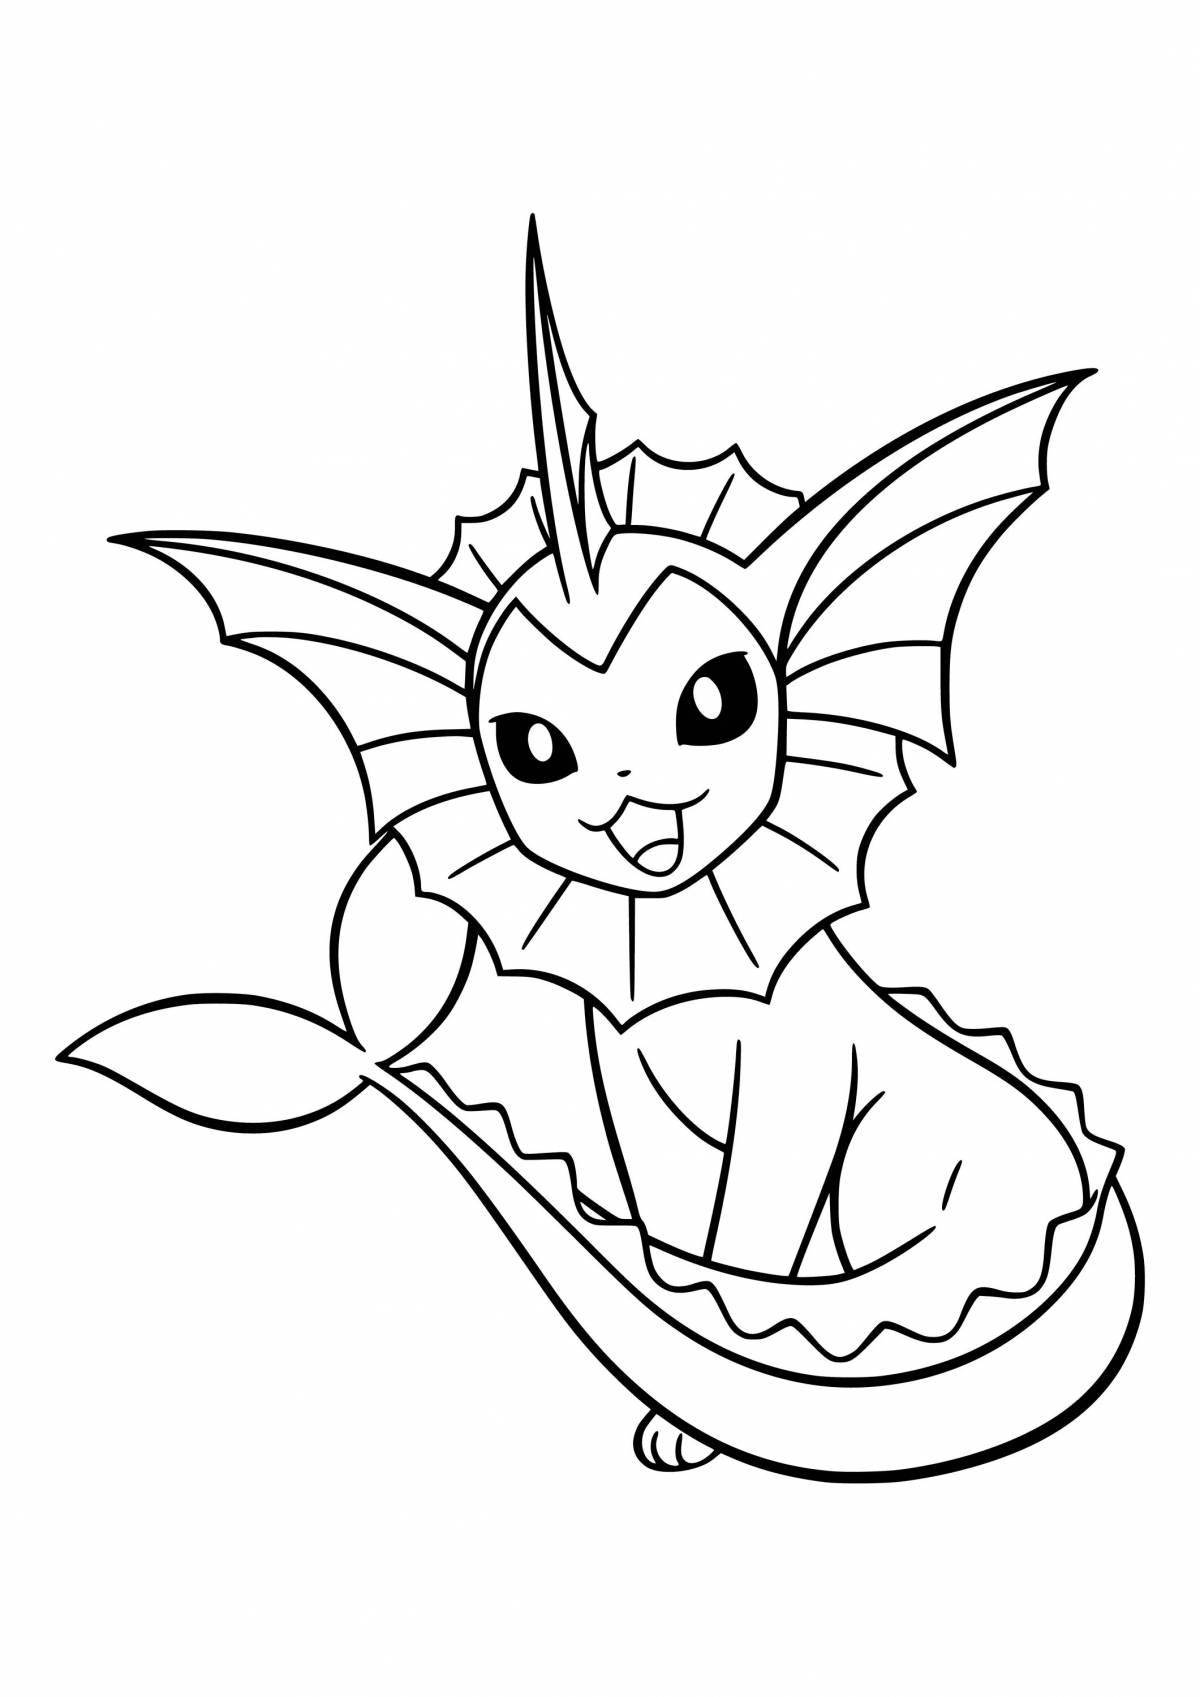 Great quality pokemon coloring book